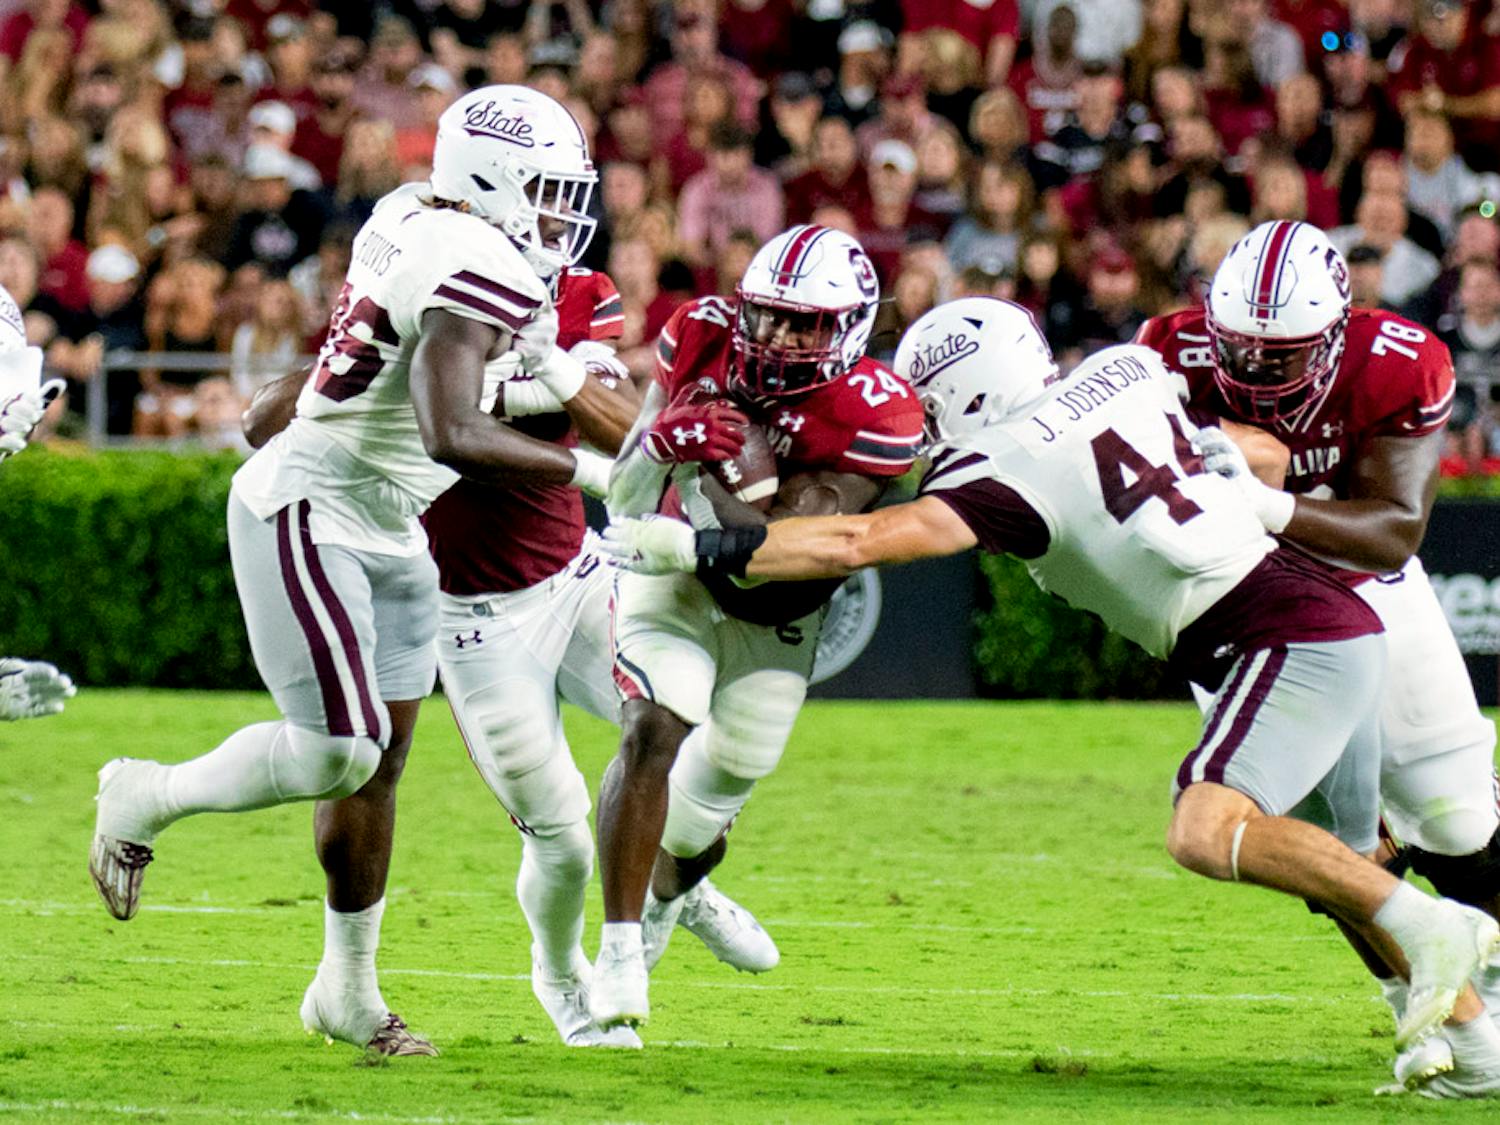 FILE — Redshirt senior running back Mario Anderson breaks through to cover his teammates during play during the University of South Carolina’s matchup against Mississippi State at Willimas-Brice Stadium on Sep. 23, 2023. Anderson rushed for 88 yards on 26 carries, both season highs.&nbsp;